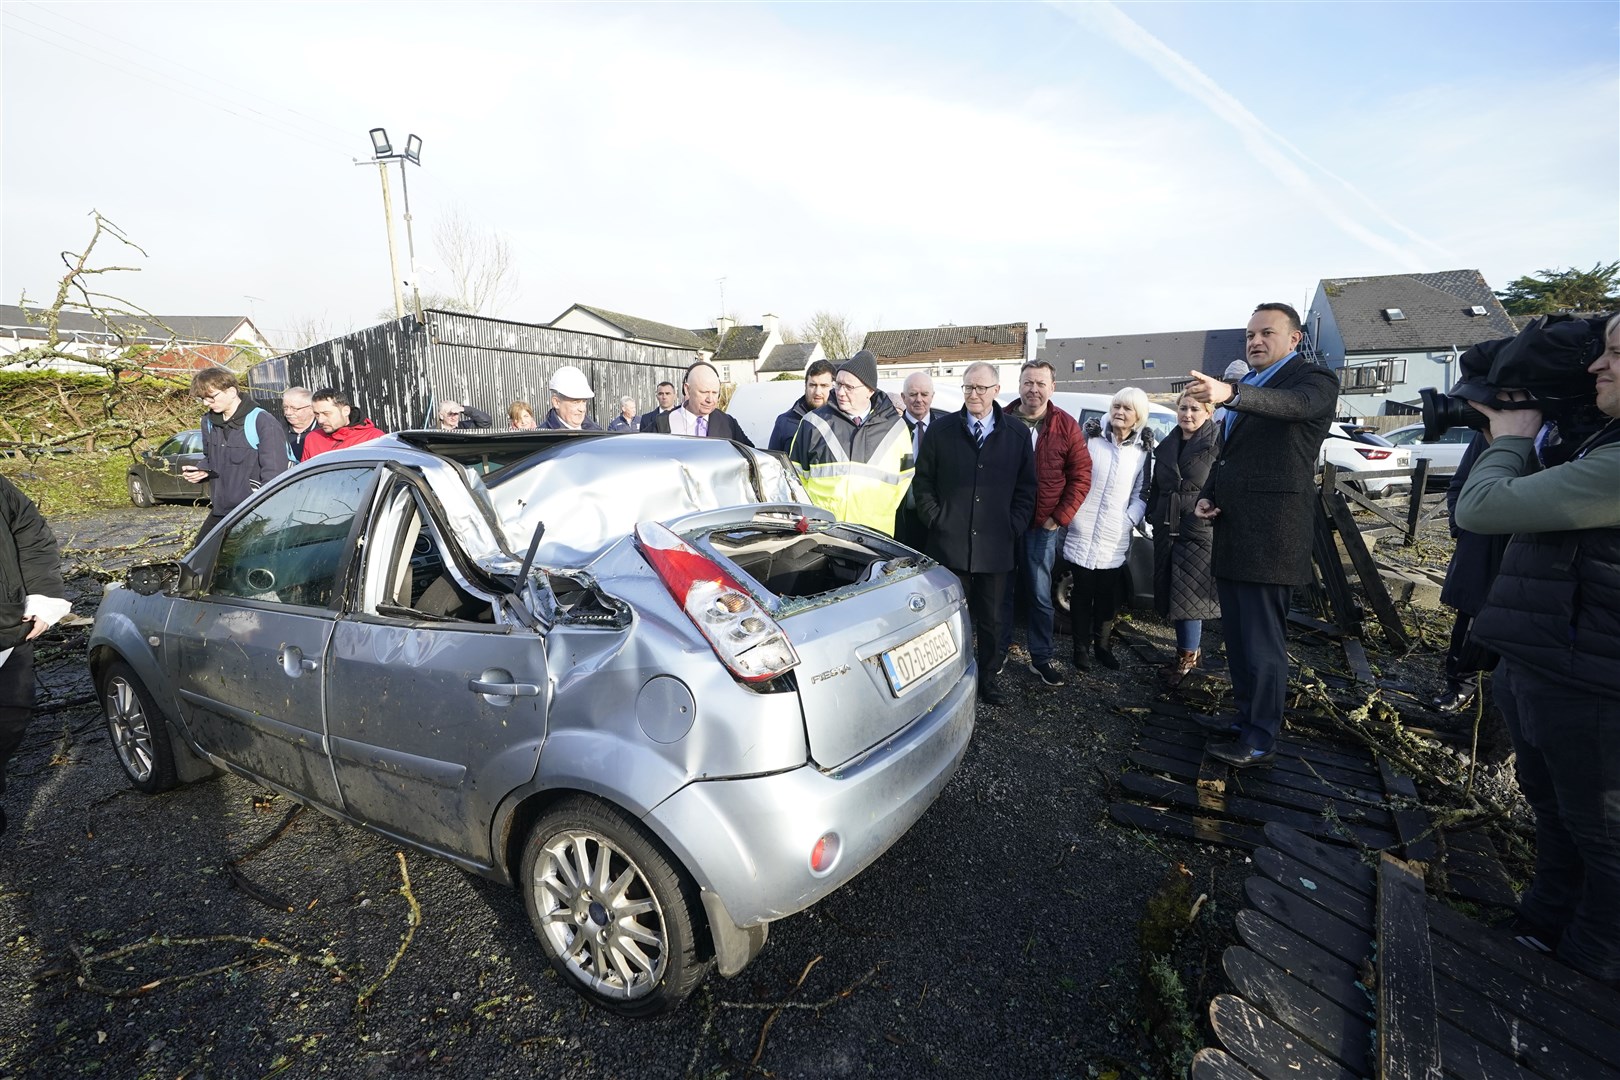 Taoiseach Leo Varadkar views a car which was damaged by a tree in Leitrim Village in Co Leitrim, after a tornado and high winds on Sunday (Niall Carson/PA)